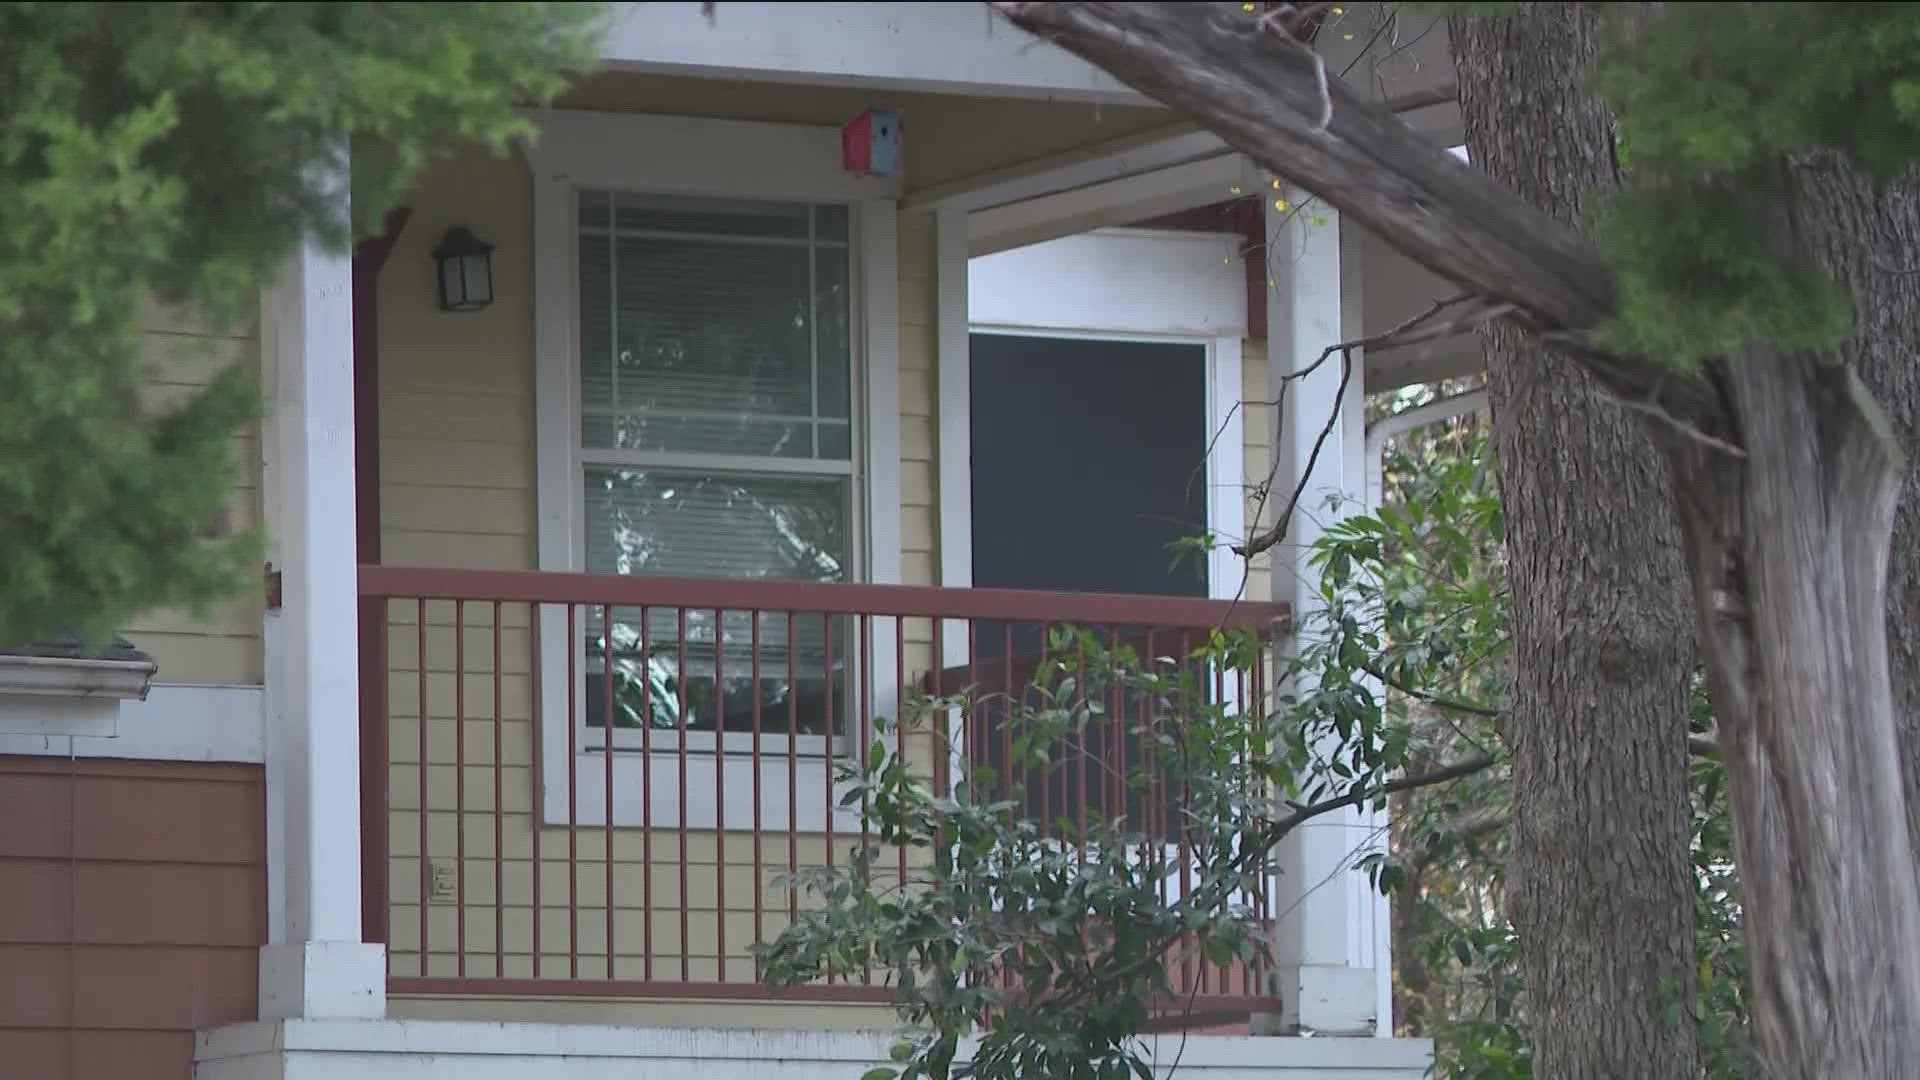 An Austin apartment complex that was severely damaged in the freeze of February 2021 has new owners.